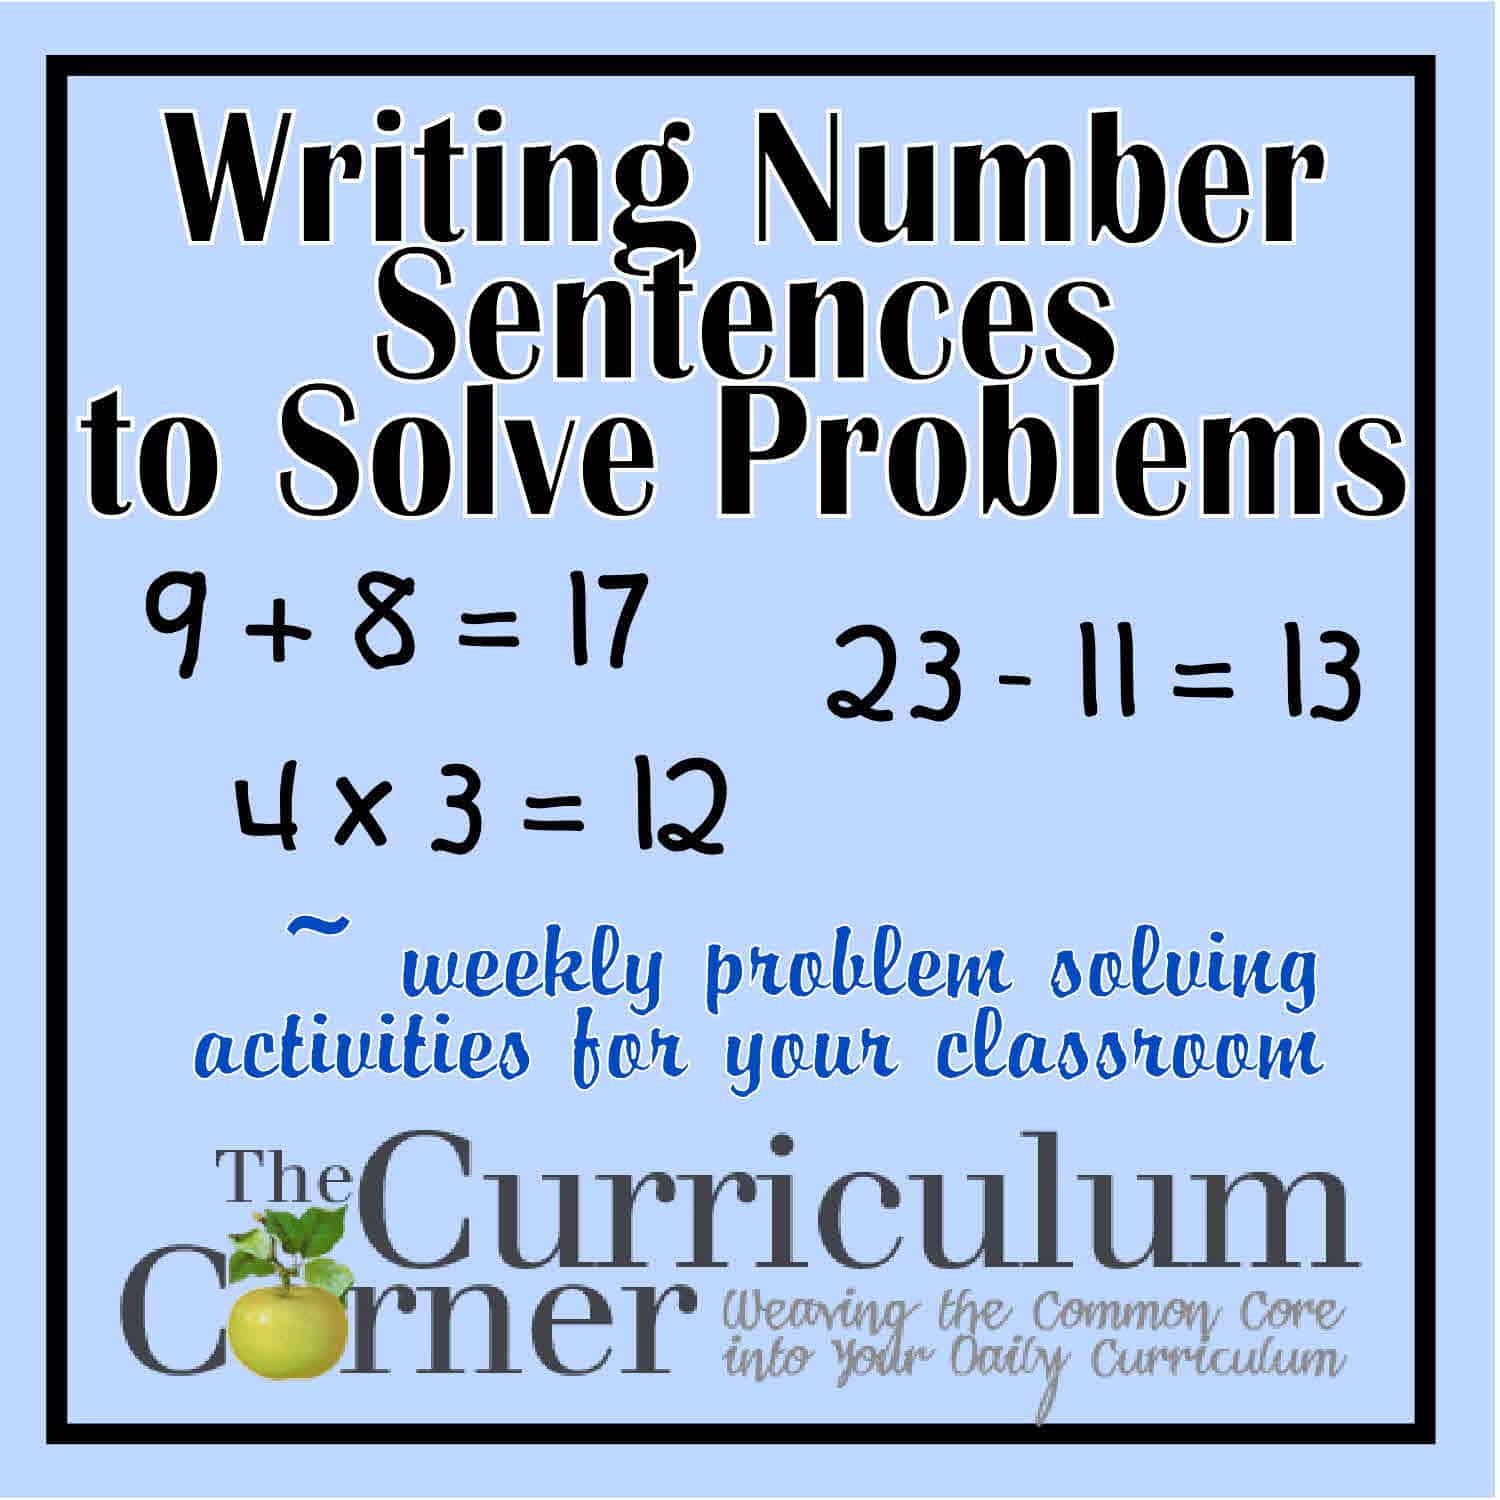 use problem solving in a sentence